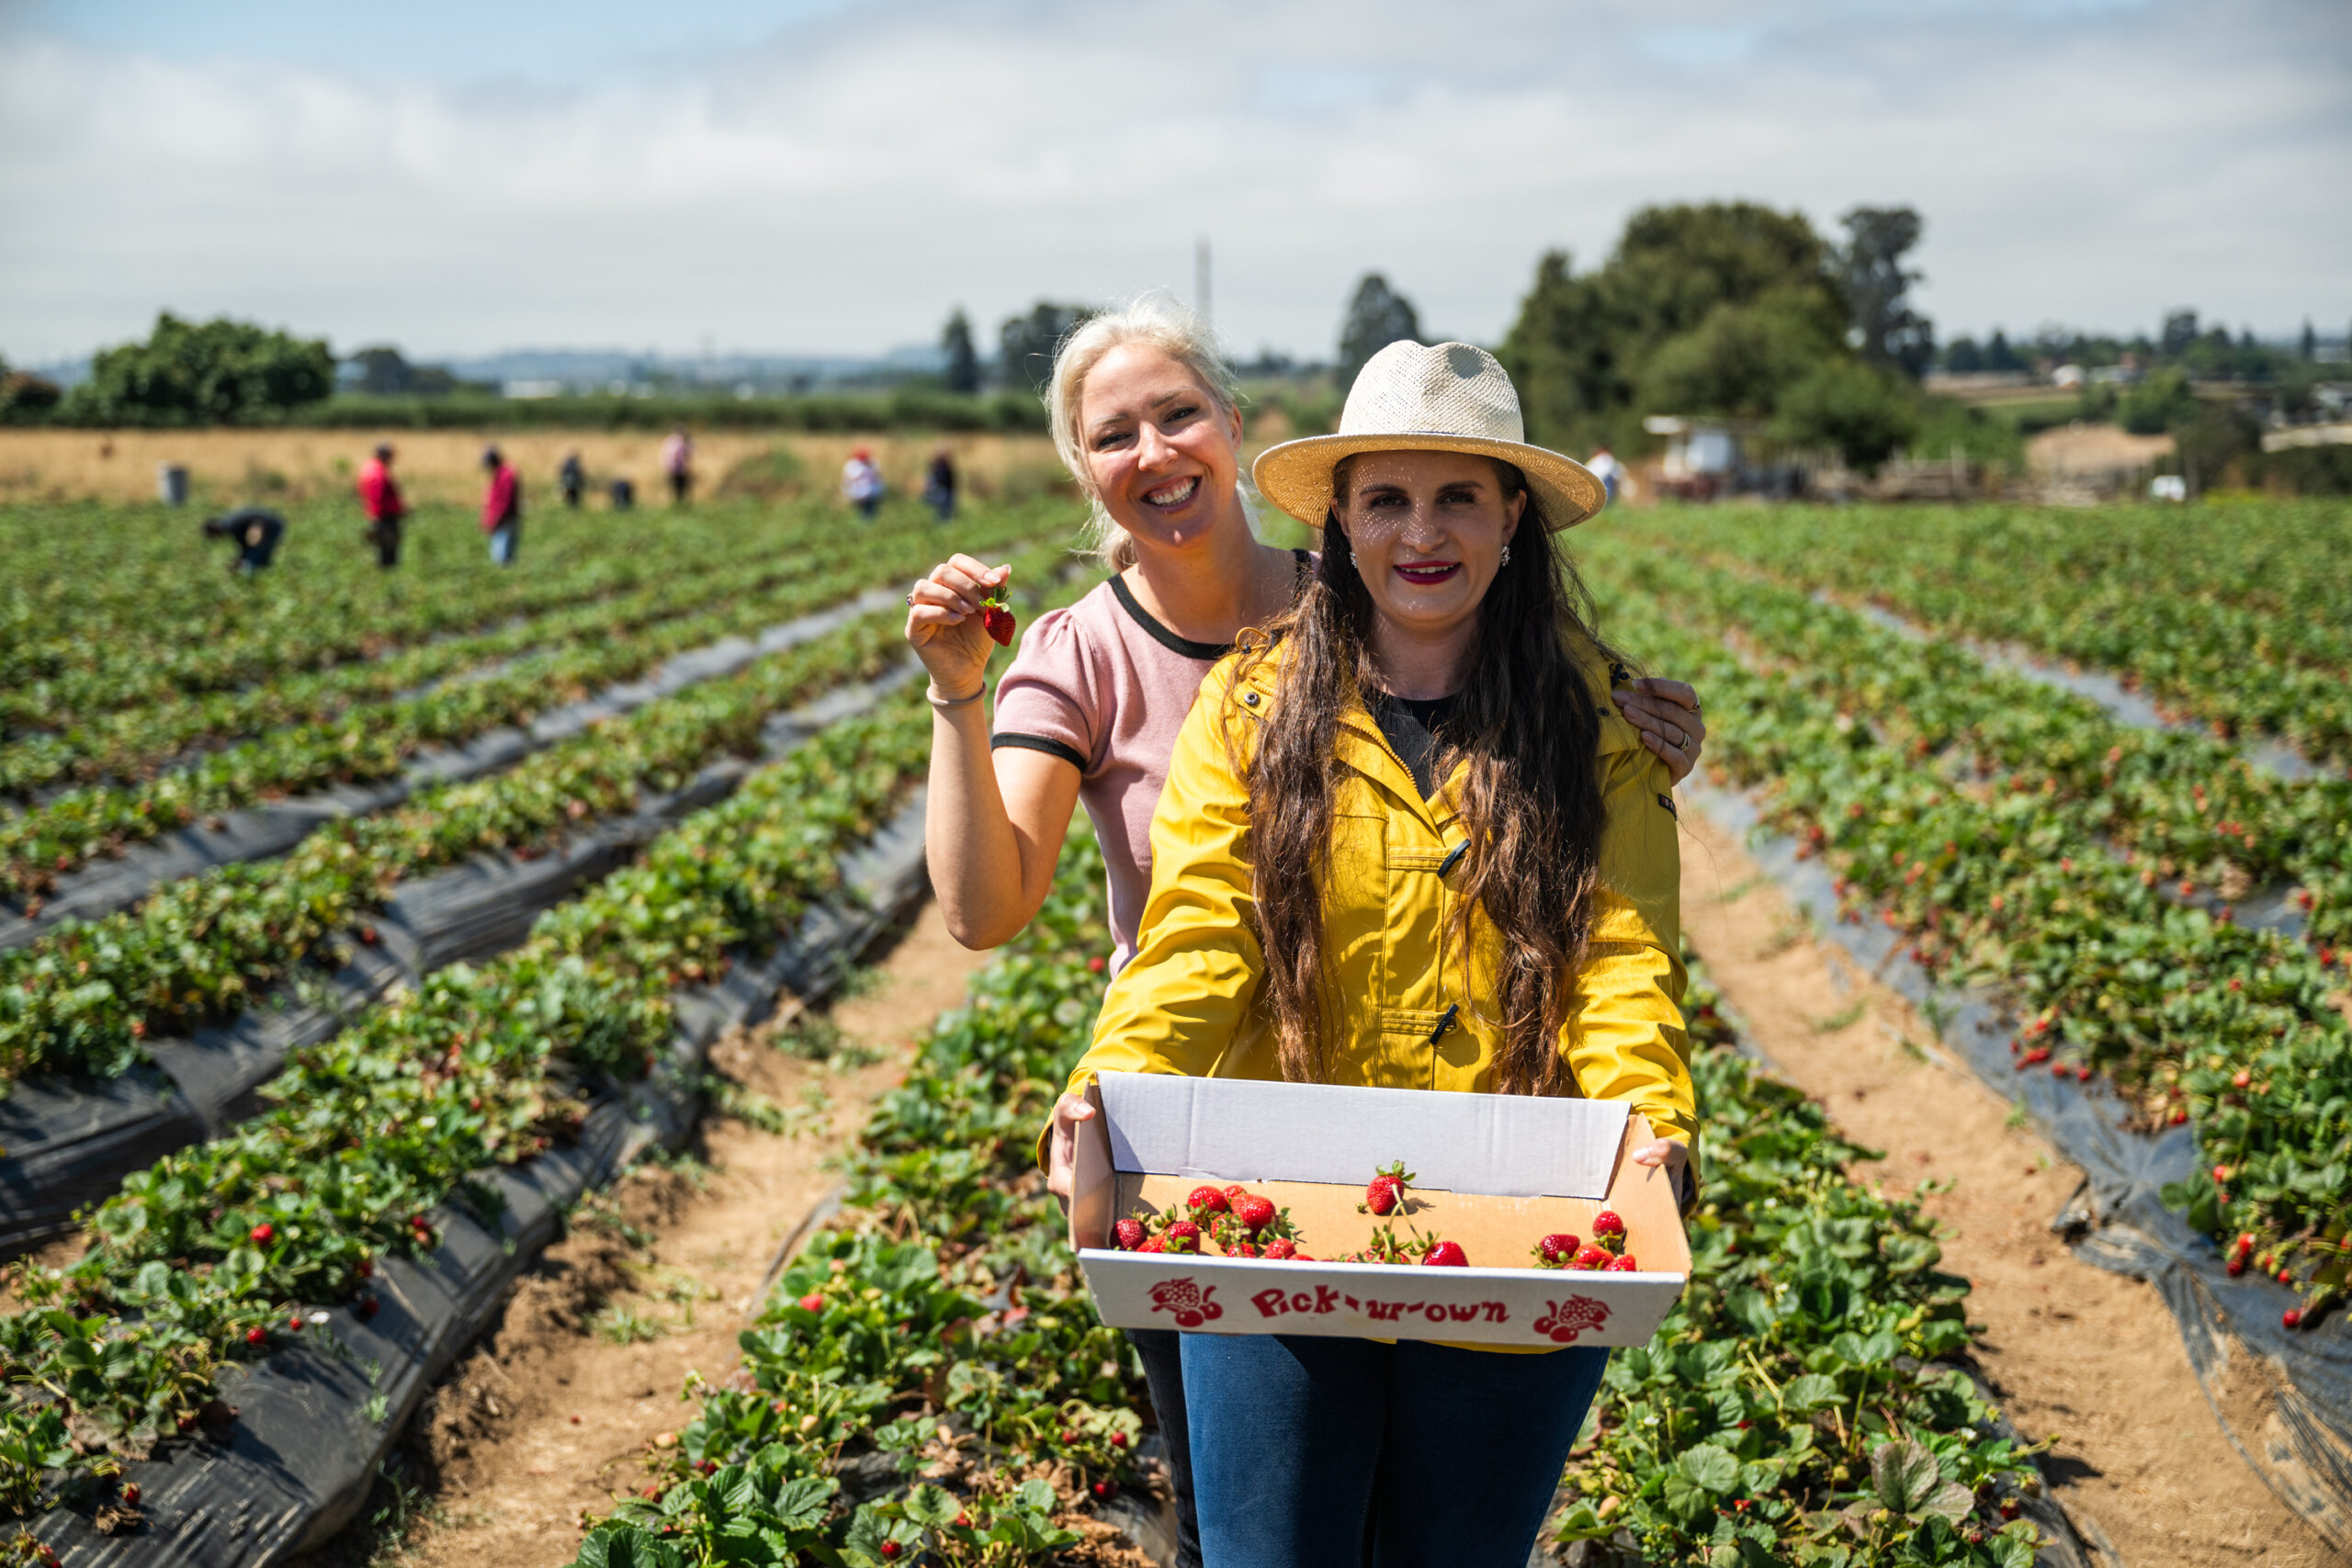 Two delegates pose in the strawberry field